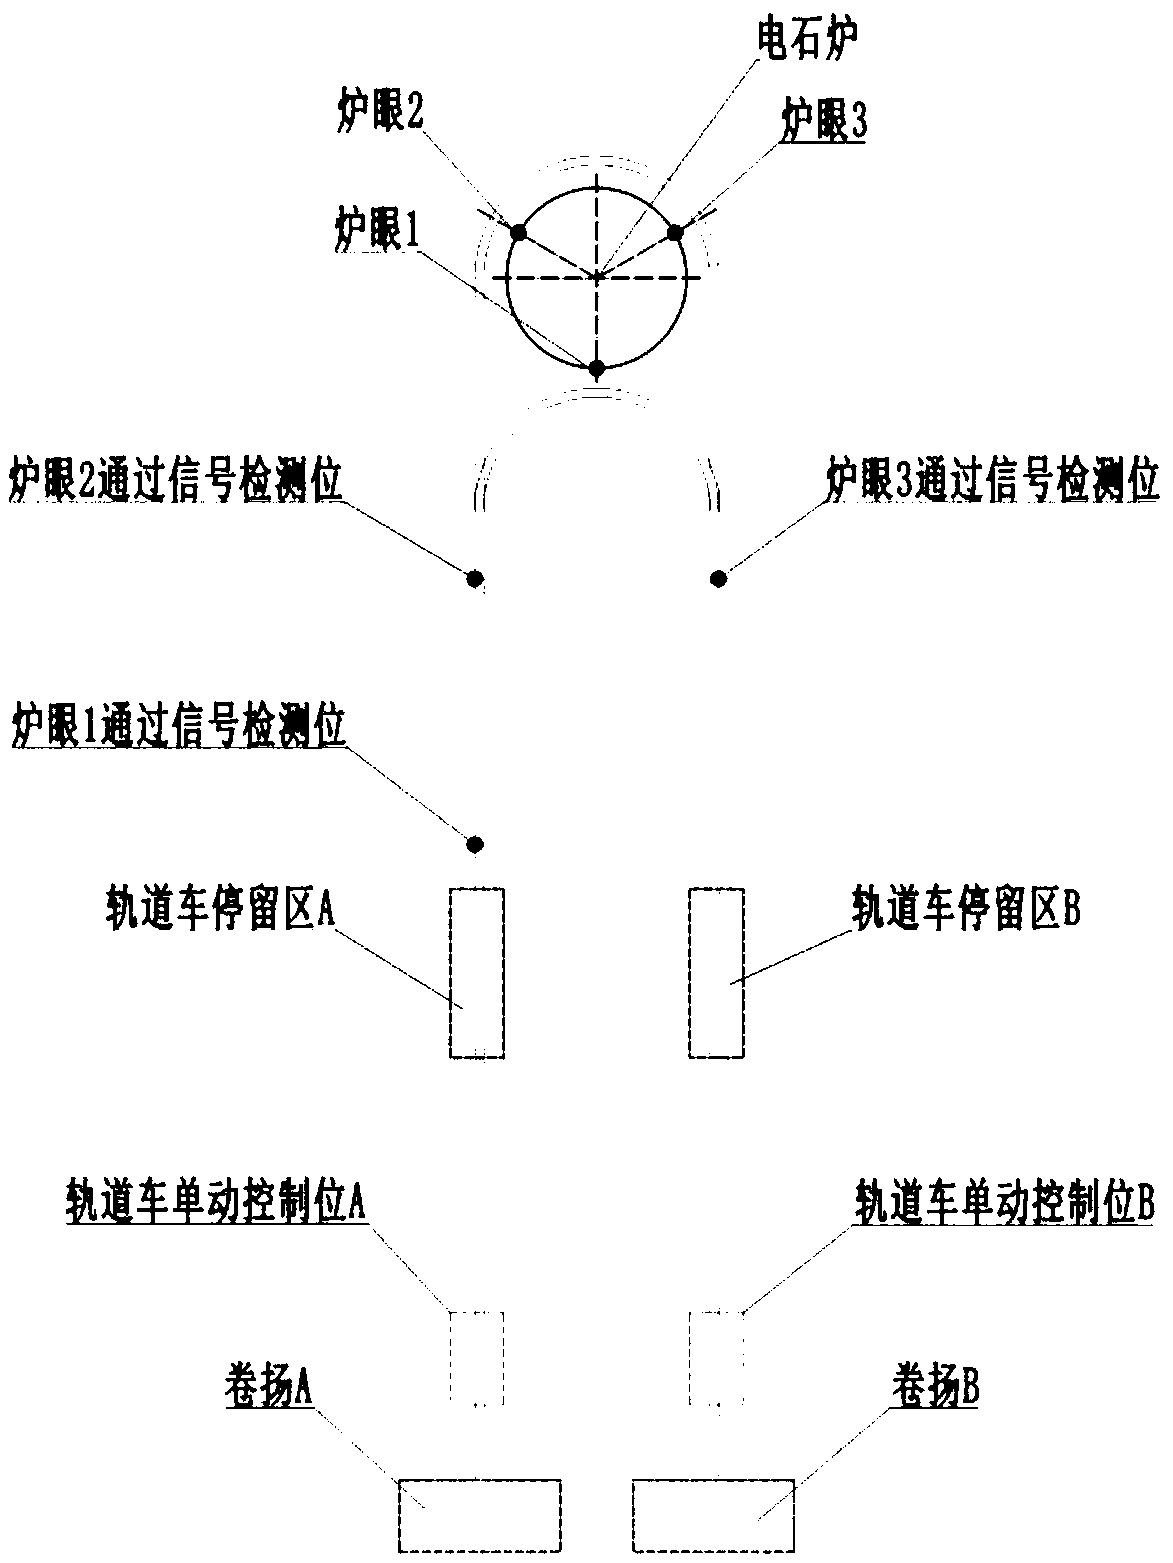 A furnace control system for remote control of calcium carbide furnace and its control method